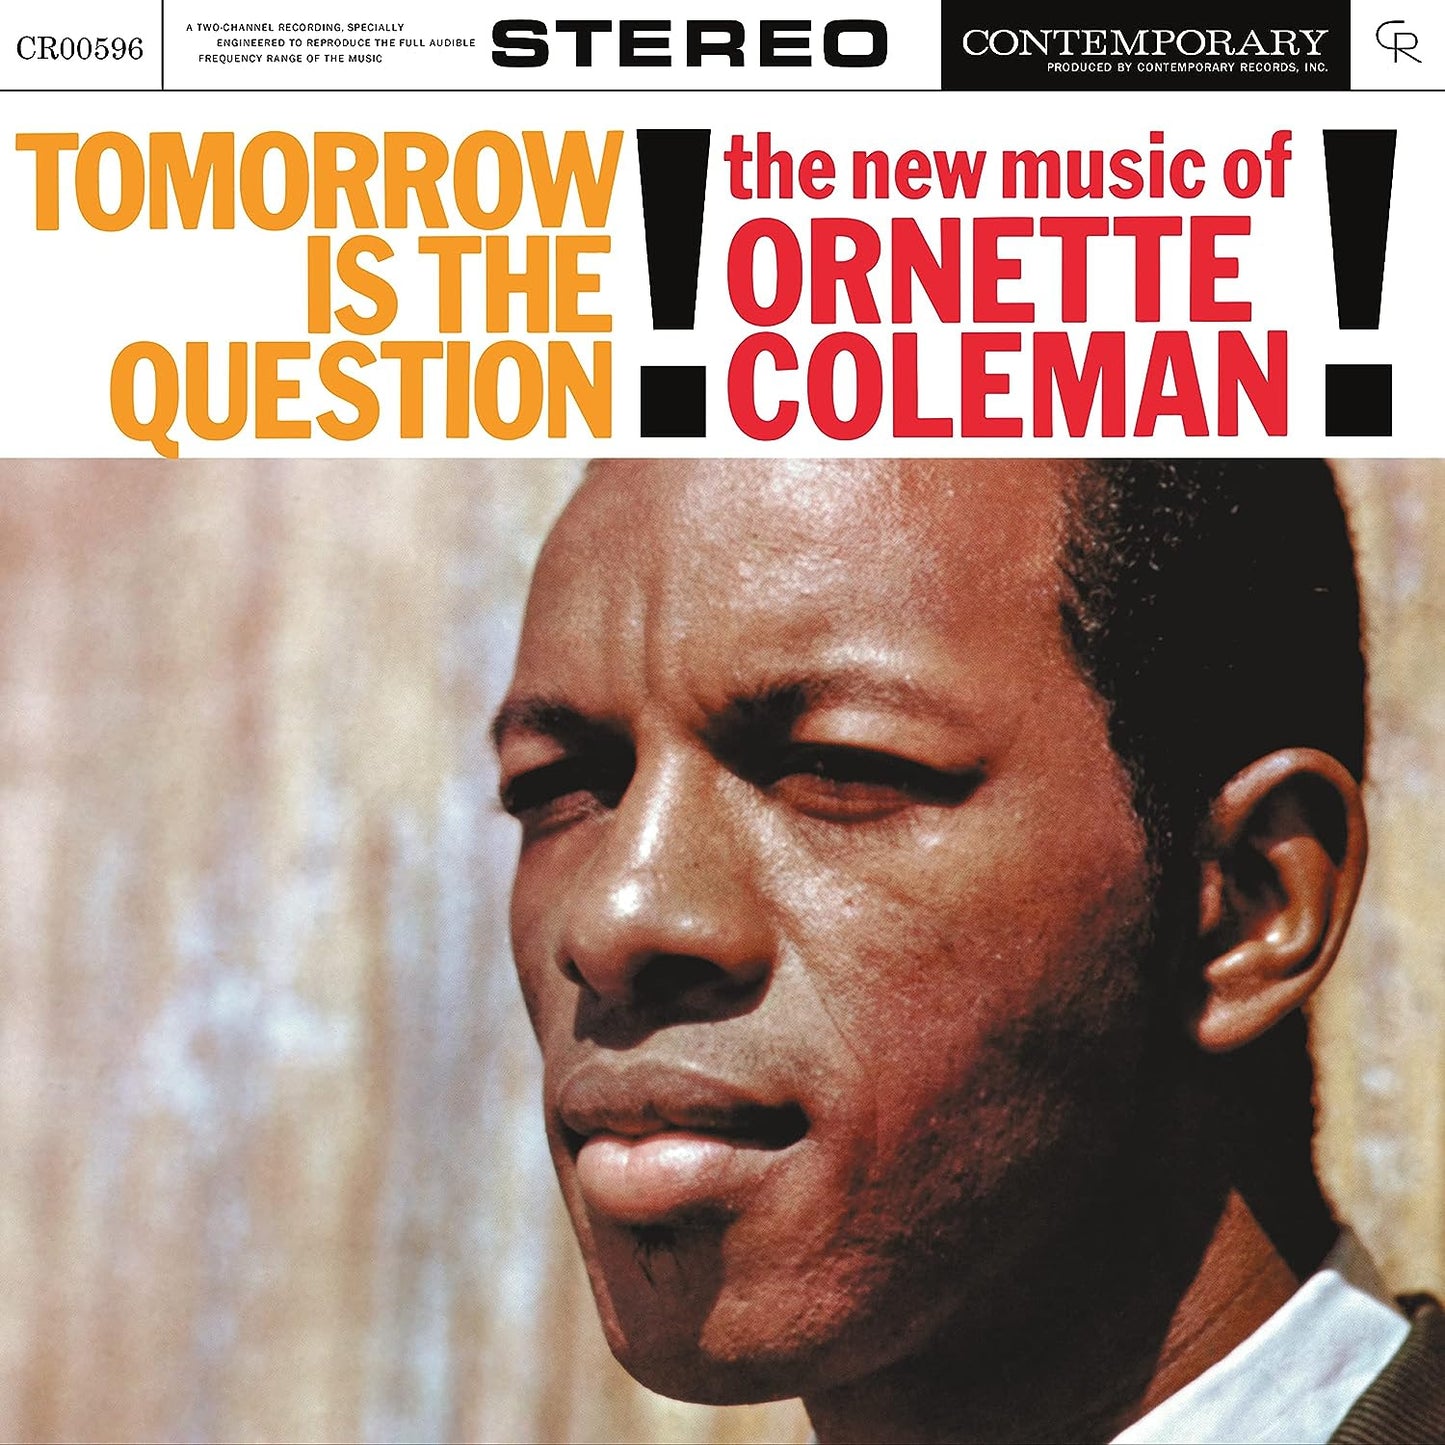 Ornette Coleman - Tomorrow Is the Question! | Buy the Vinyl LP from Flying Nun Records